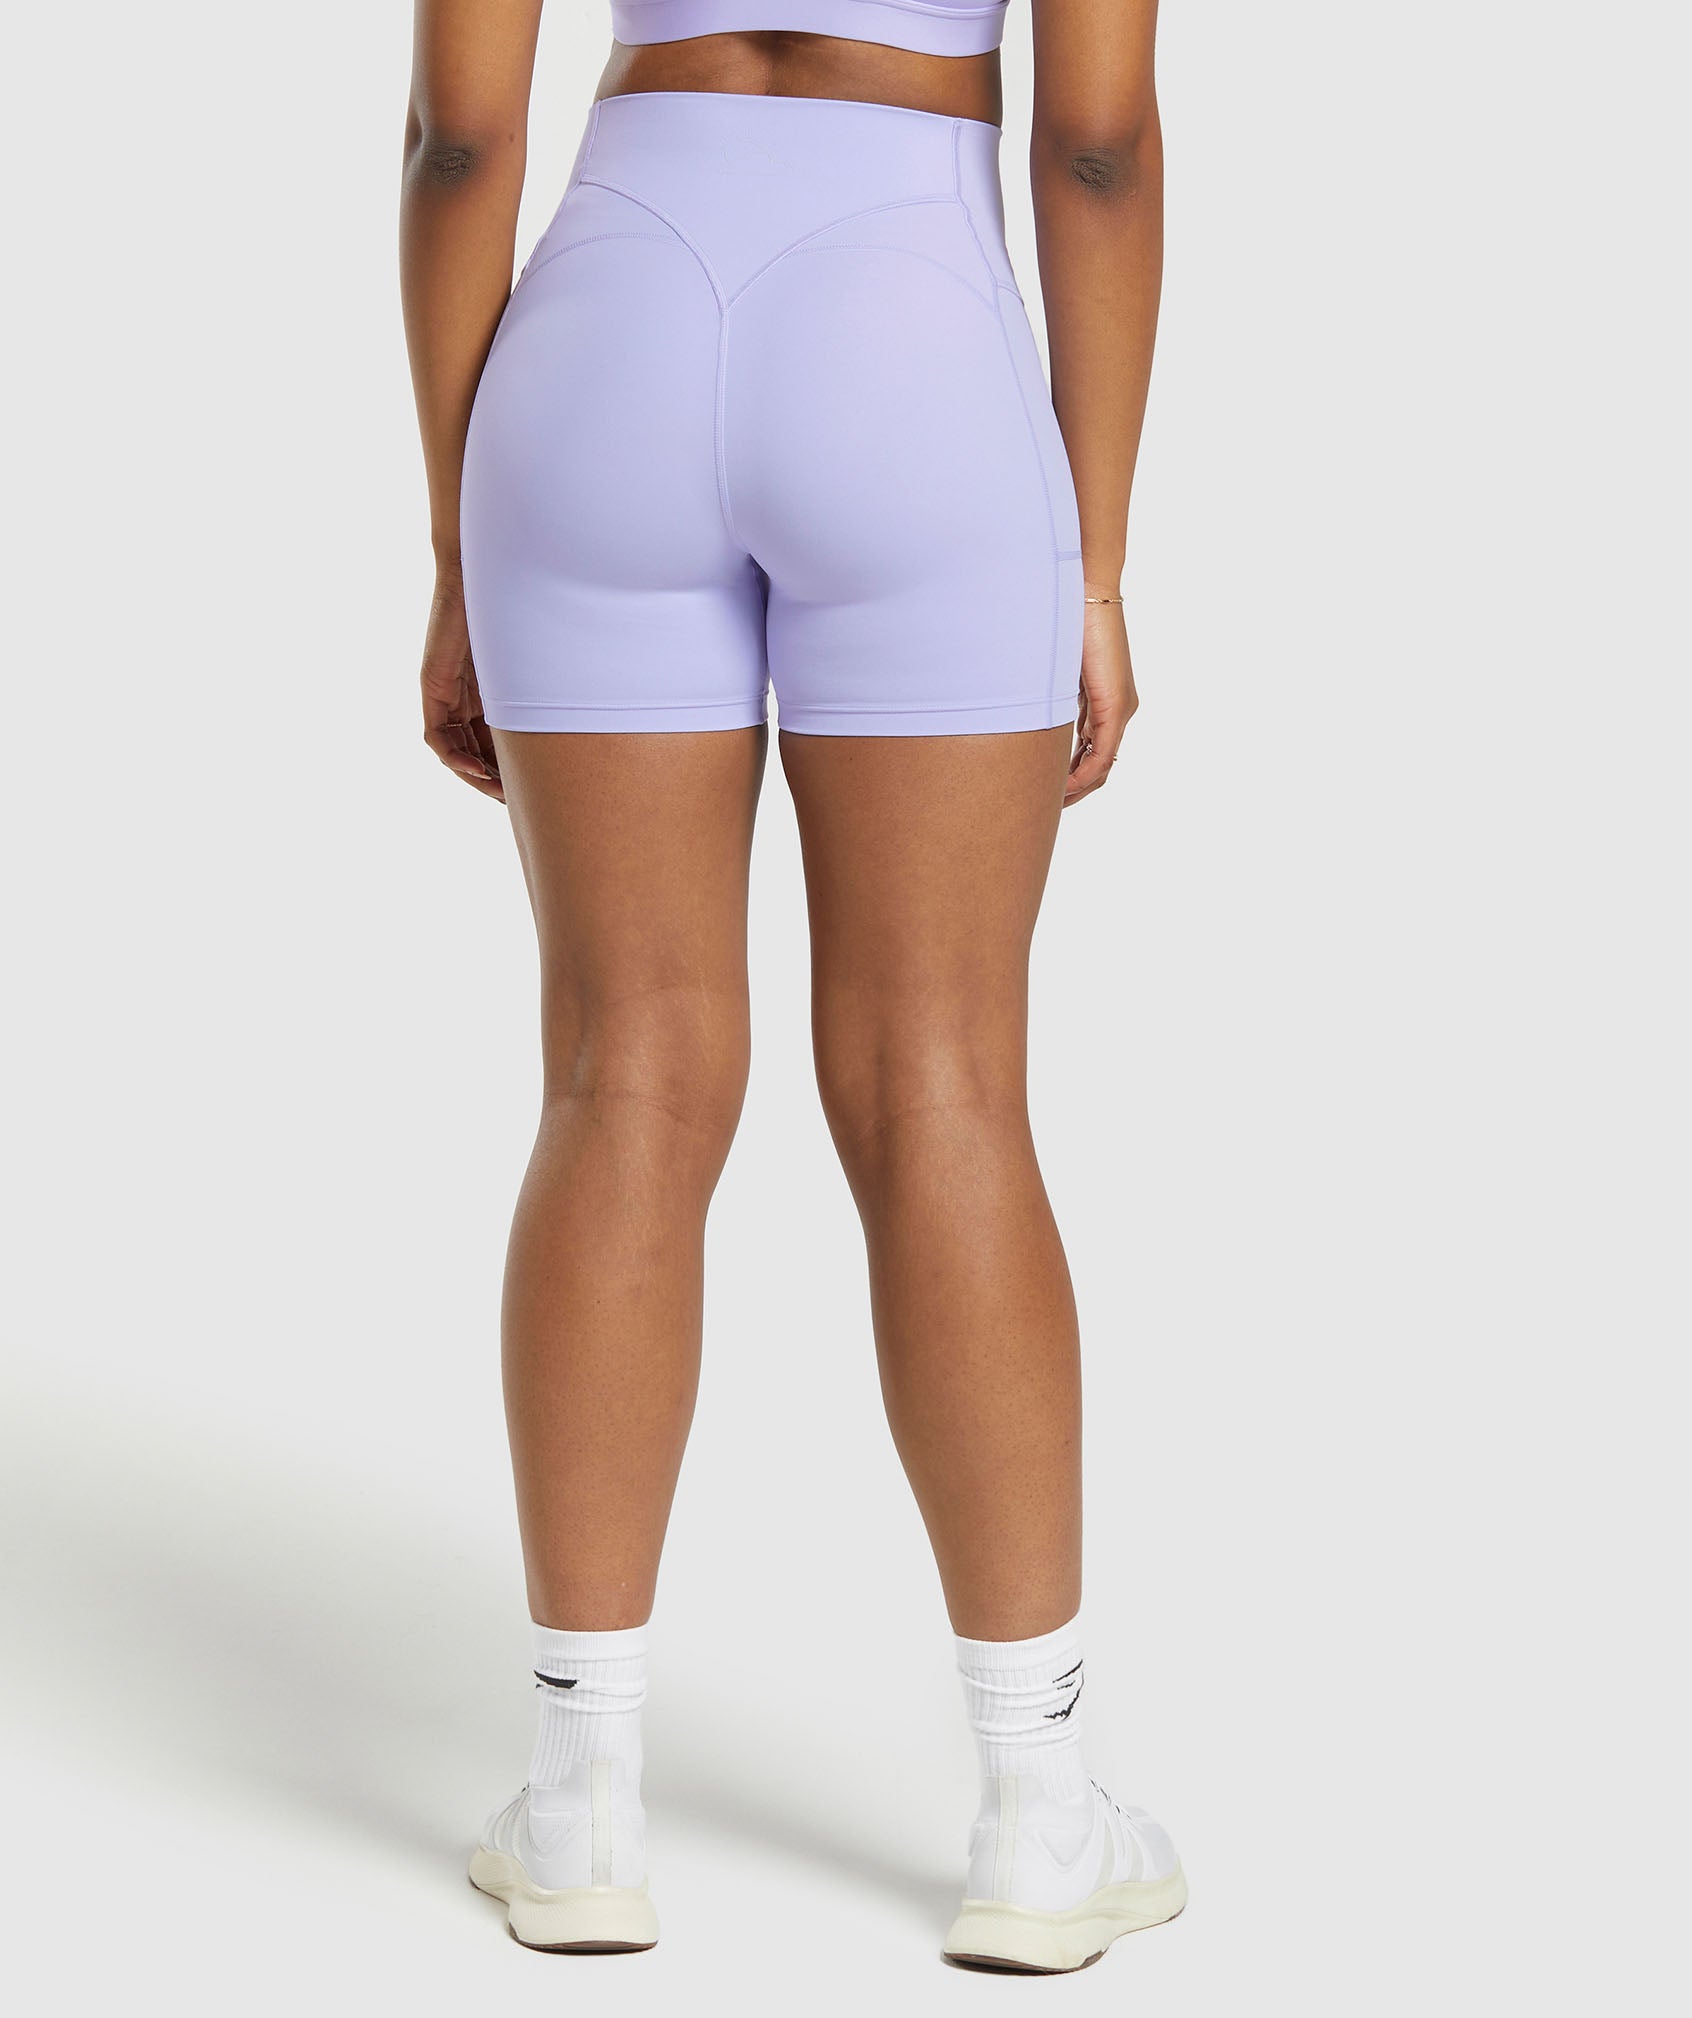 Gymshark GS x Libby Shorts - Powdered Lilac